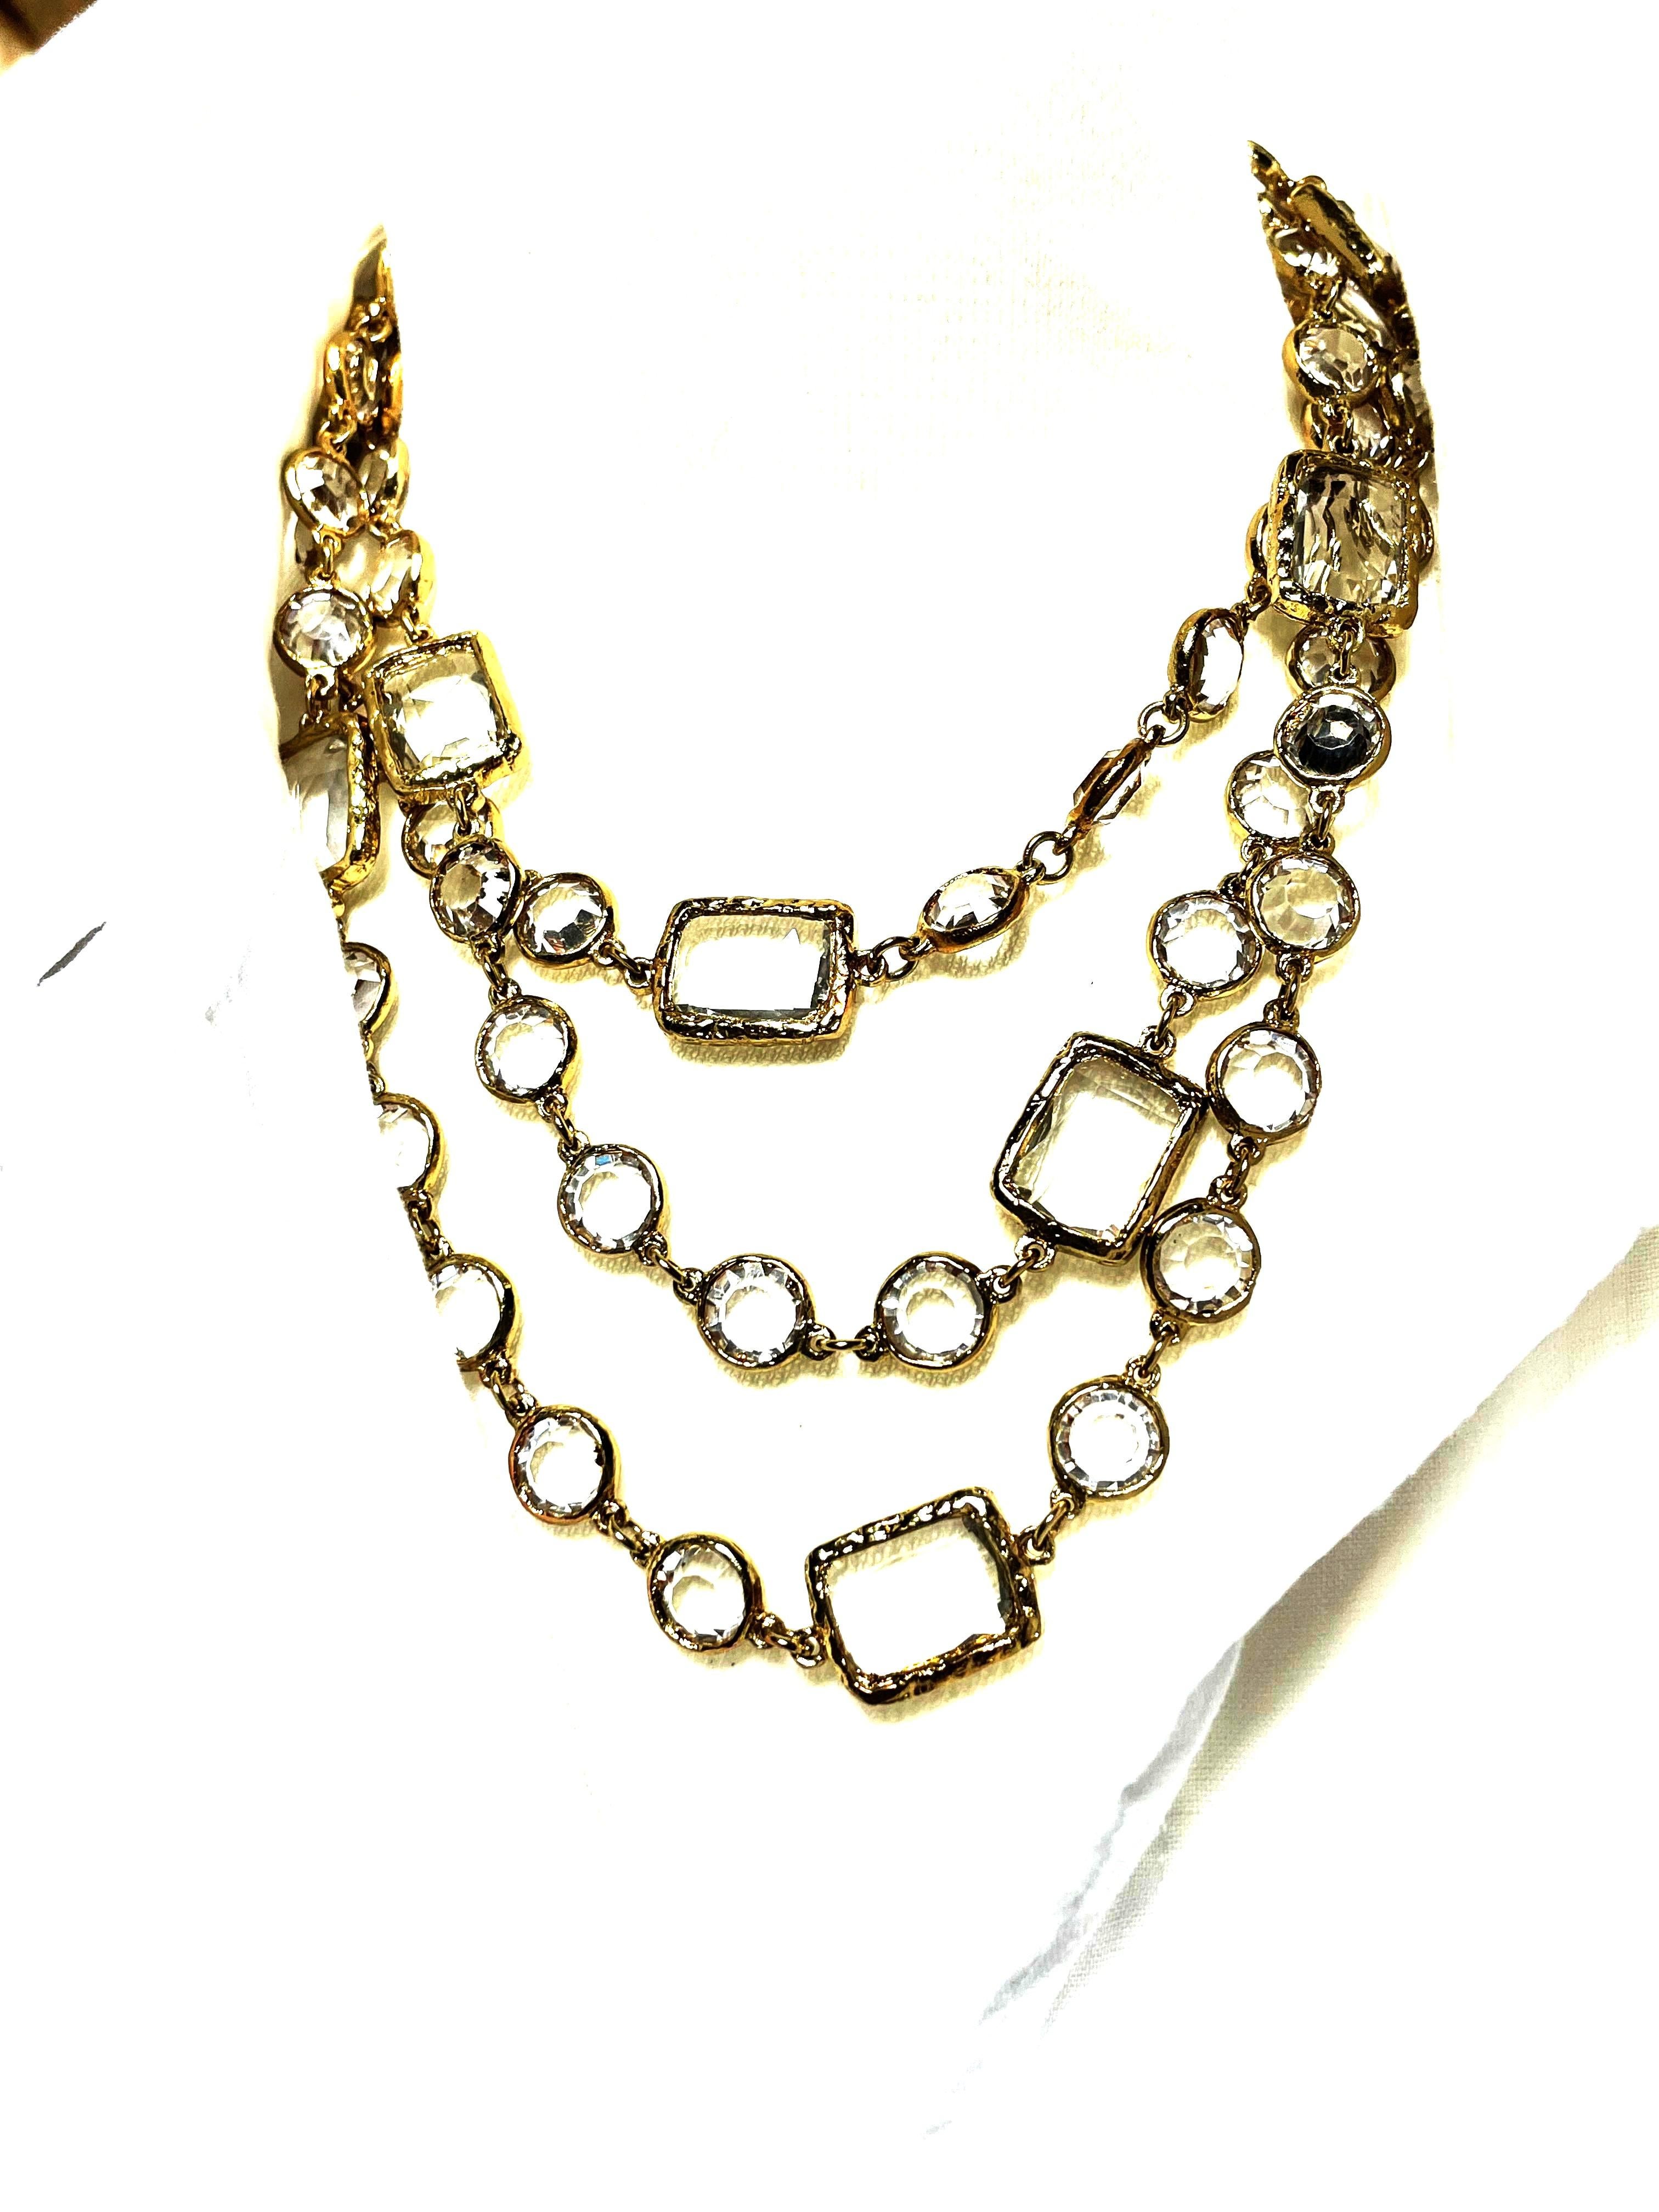 Vintage CHANEL Necklace/Sautoir with 12 clear Chicklets, signed 1981, gold plate 4